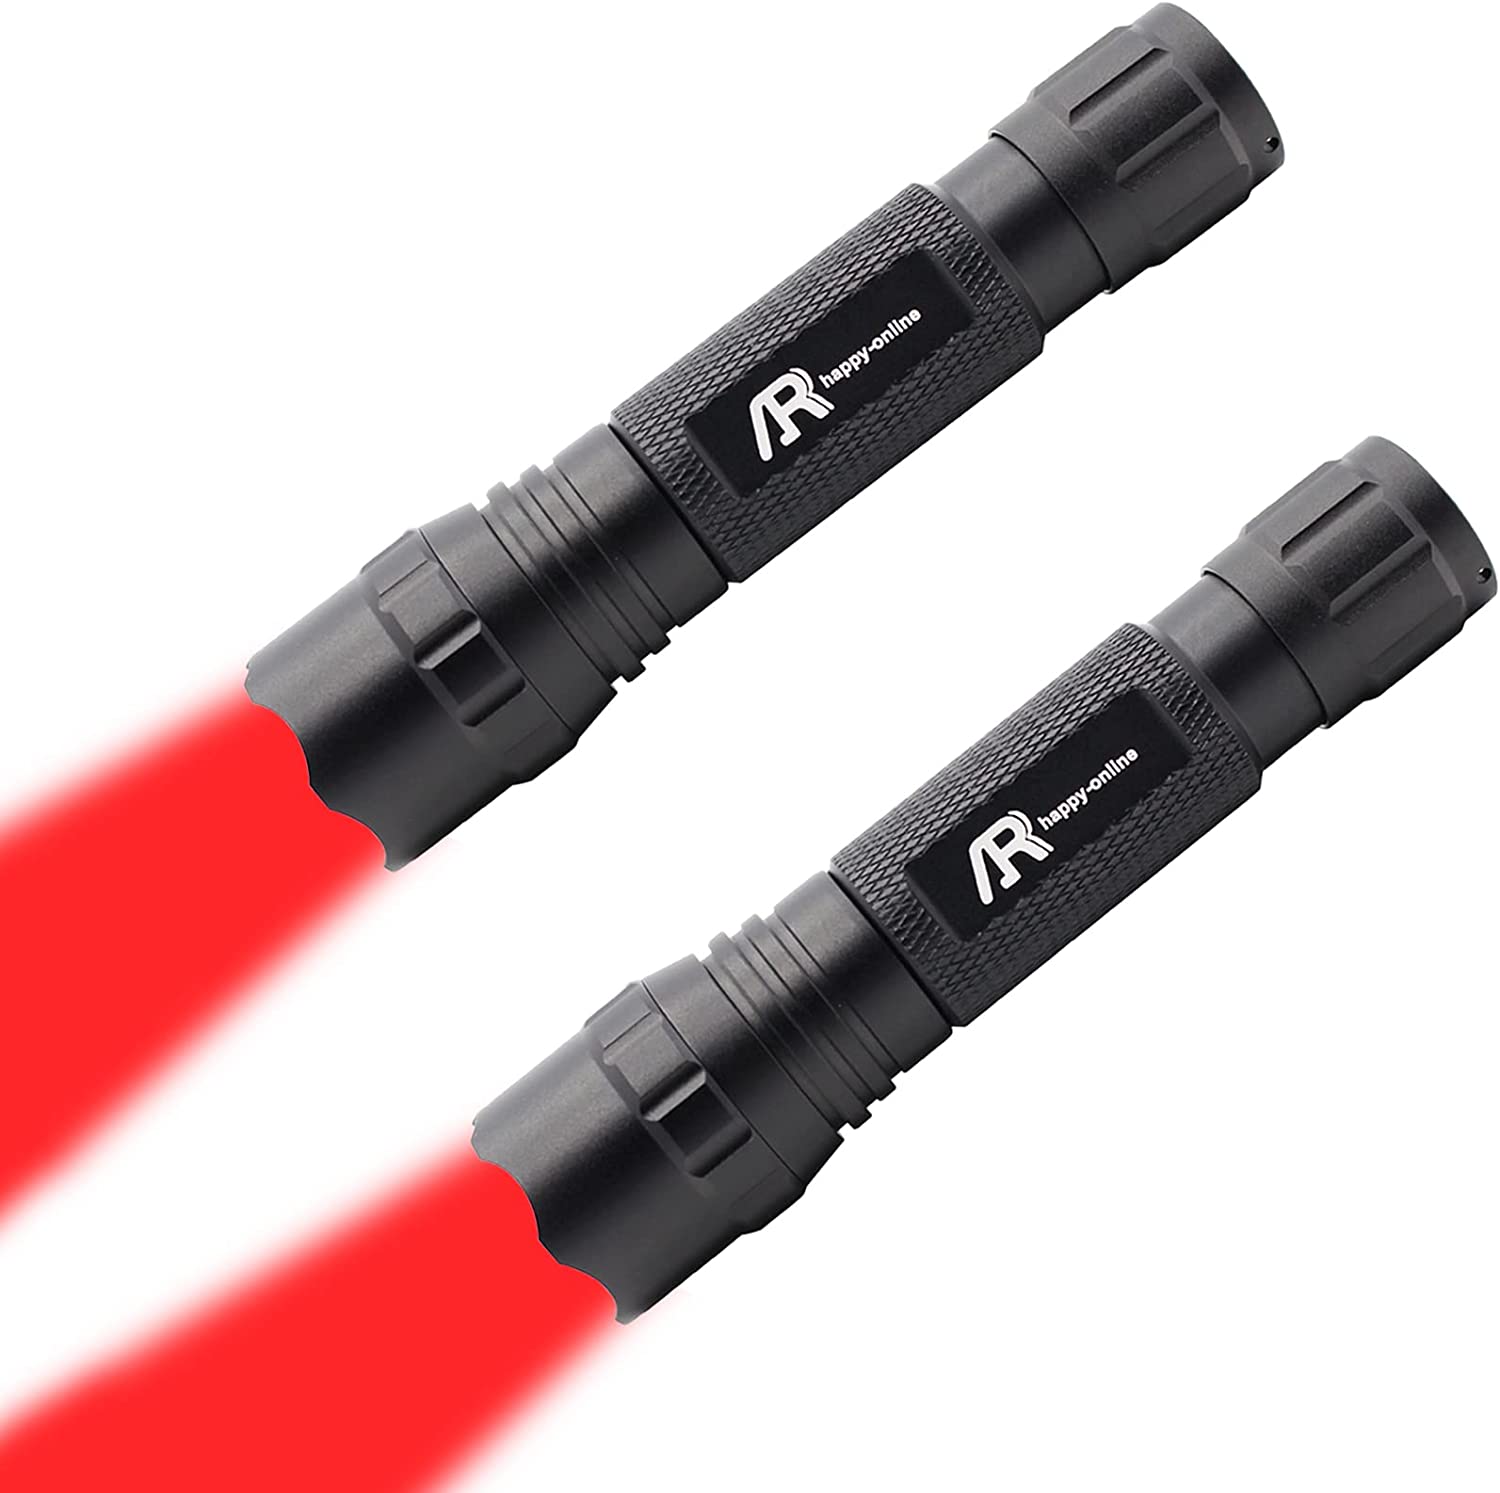 AR happy online (2 Pack) Red Light LED Tactical Flashlight, Single Mode, Zoomable, Water Resistant, Red Light LED Torch for Camping, Hiking, Hunting, Night Vision, Astronomy and Emergency